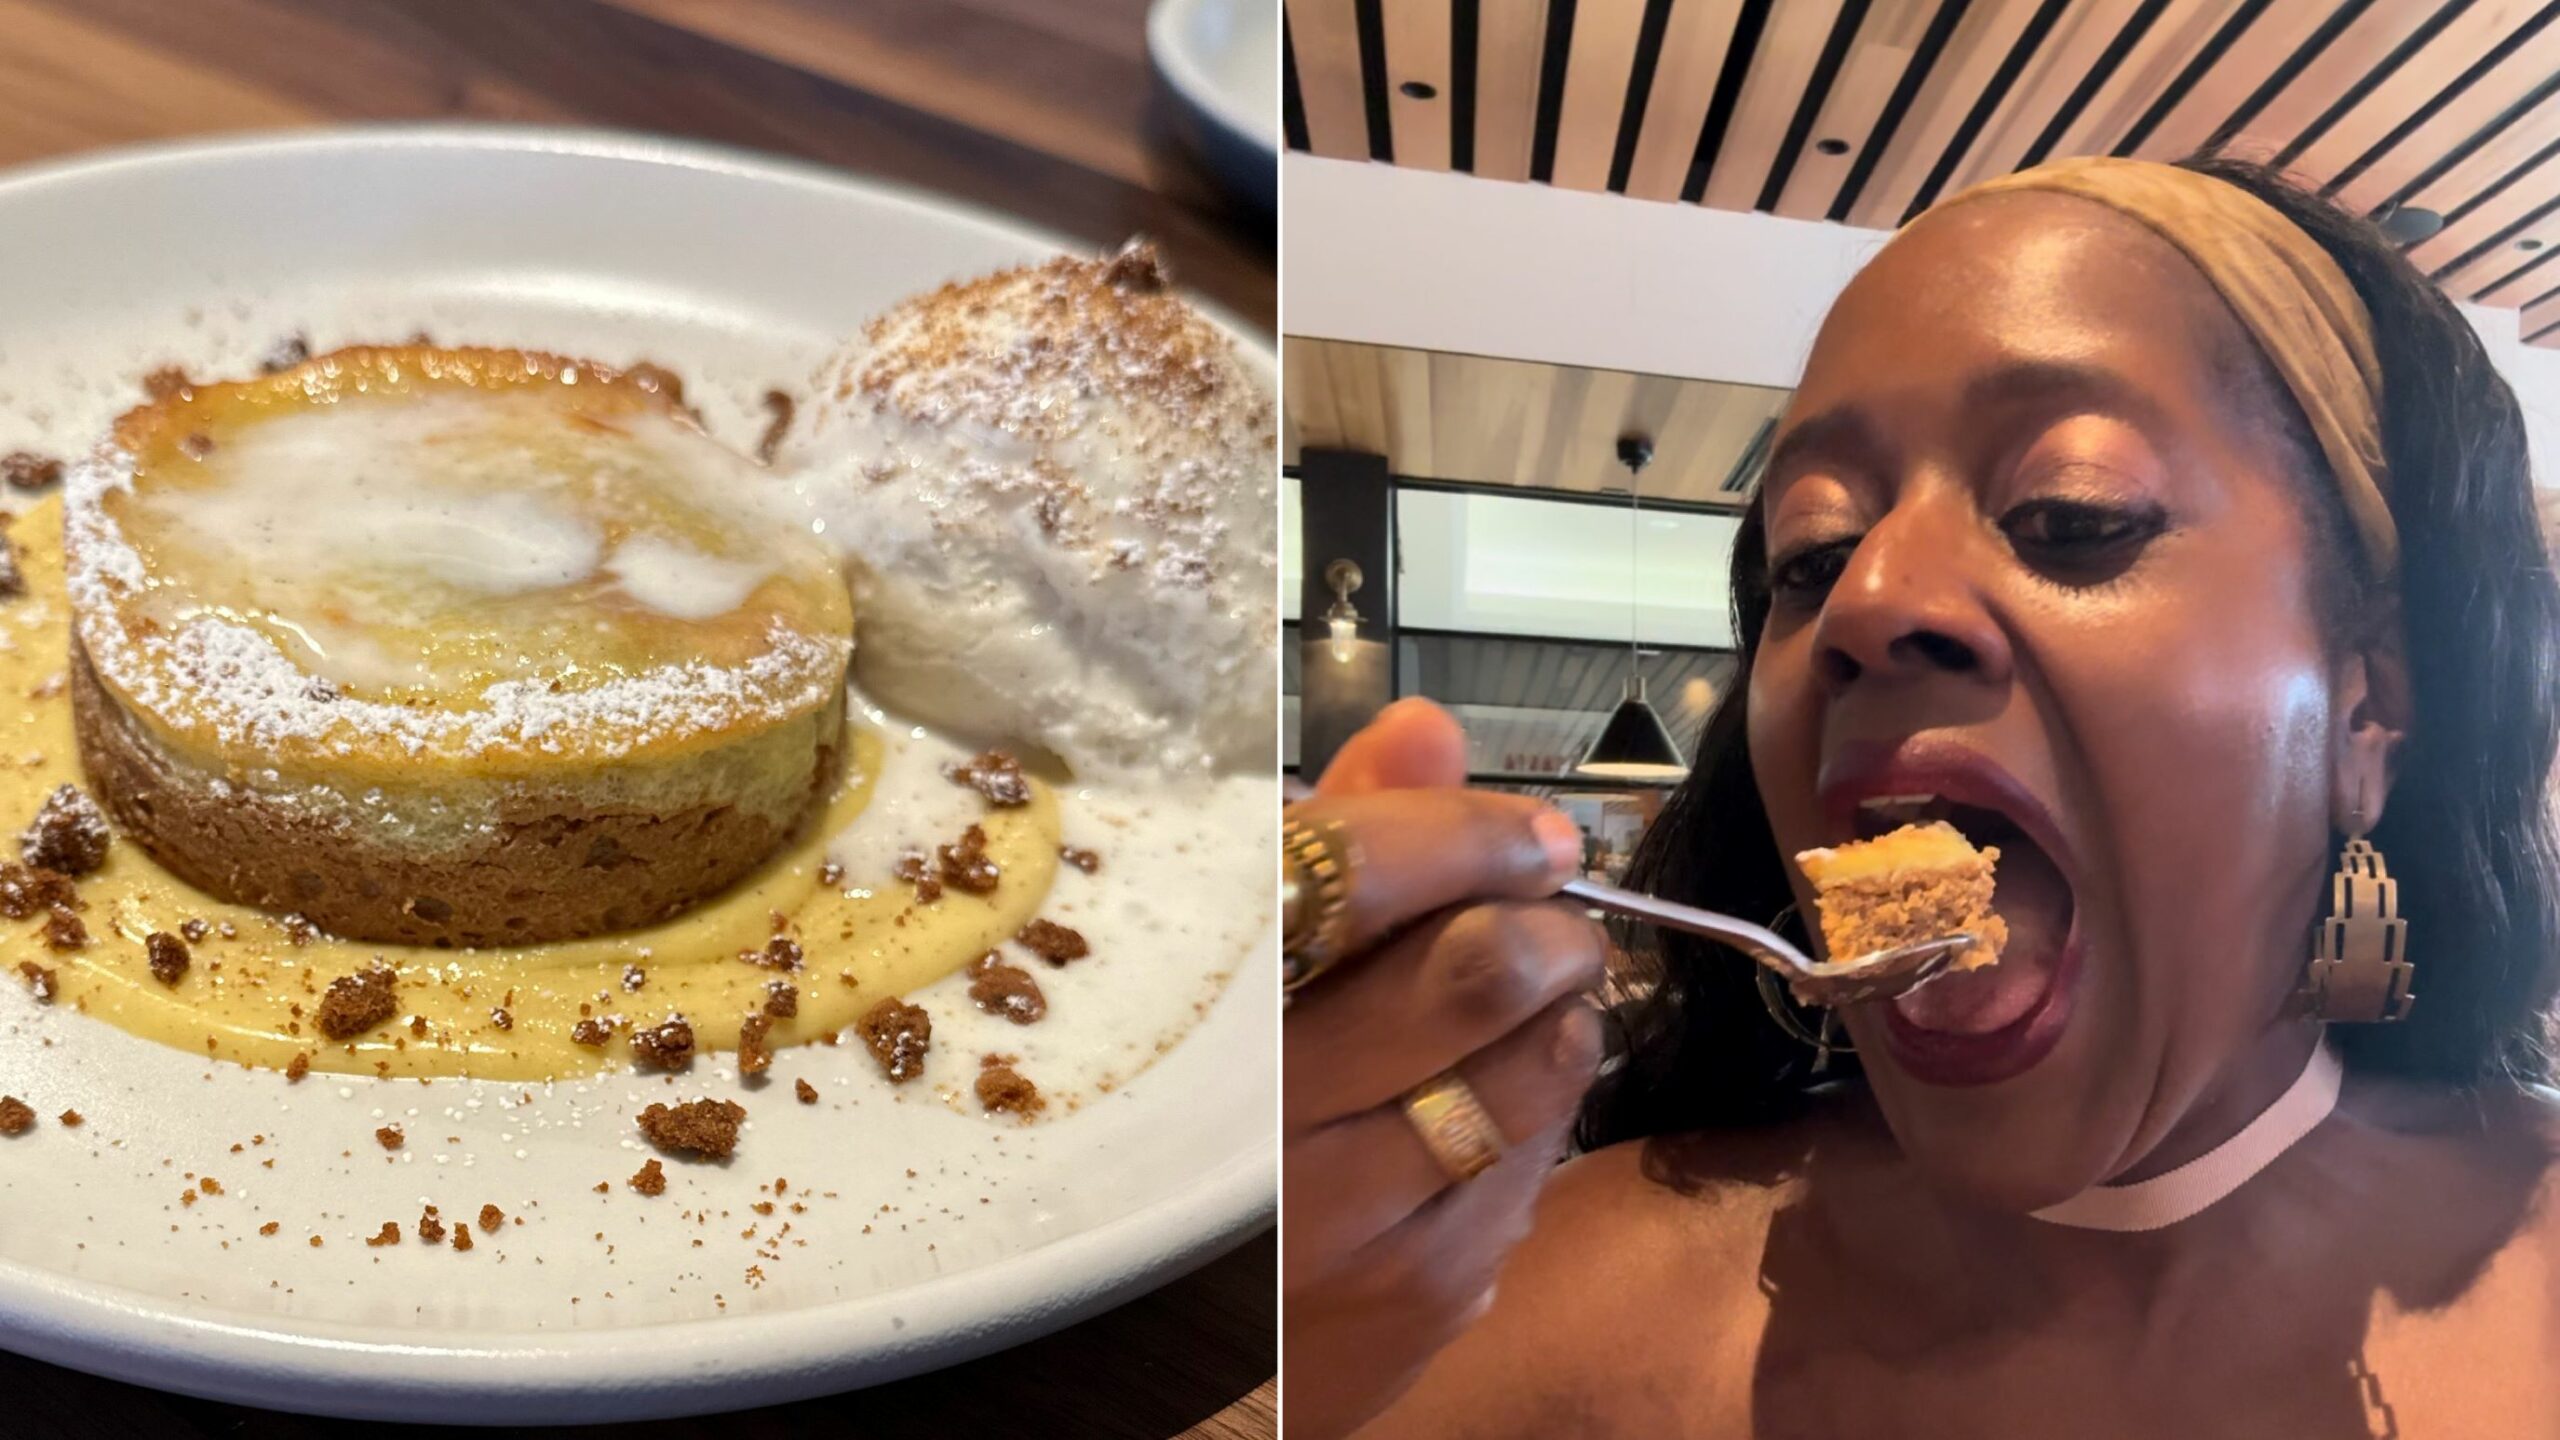 Two images from the new North Italia at Westfield Topanga, one is the seasonal butter cake and the other is a woman eating the seasonal butter cake.